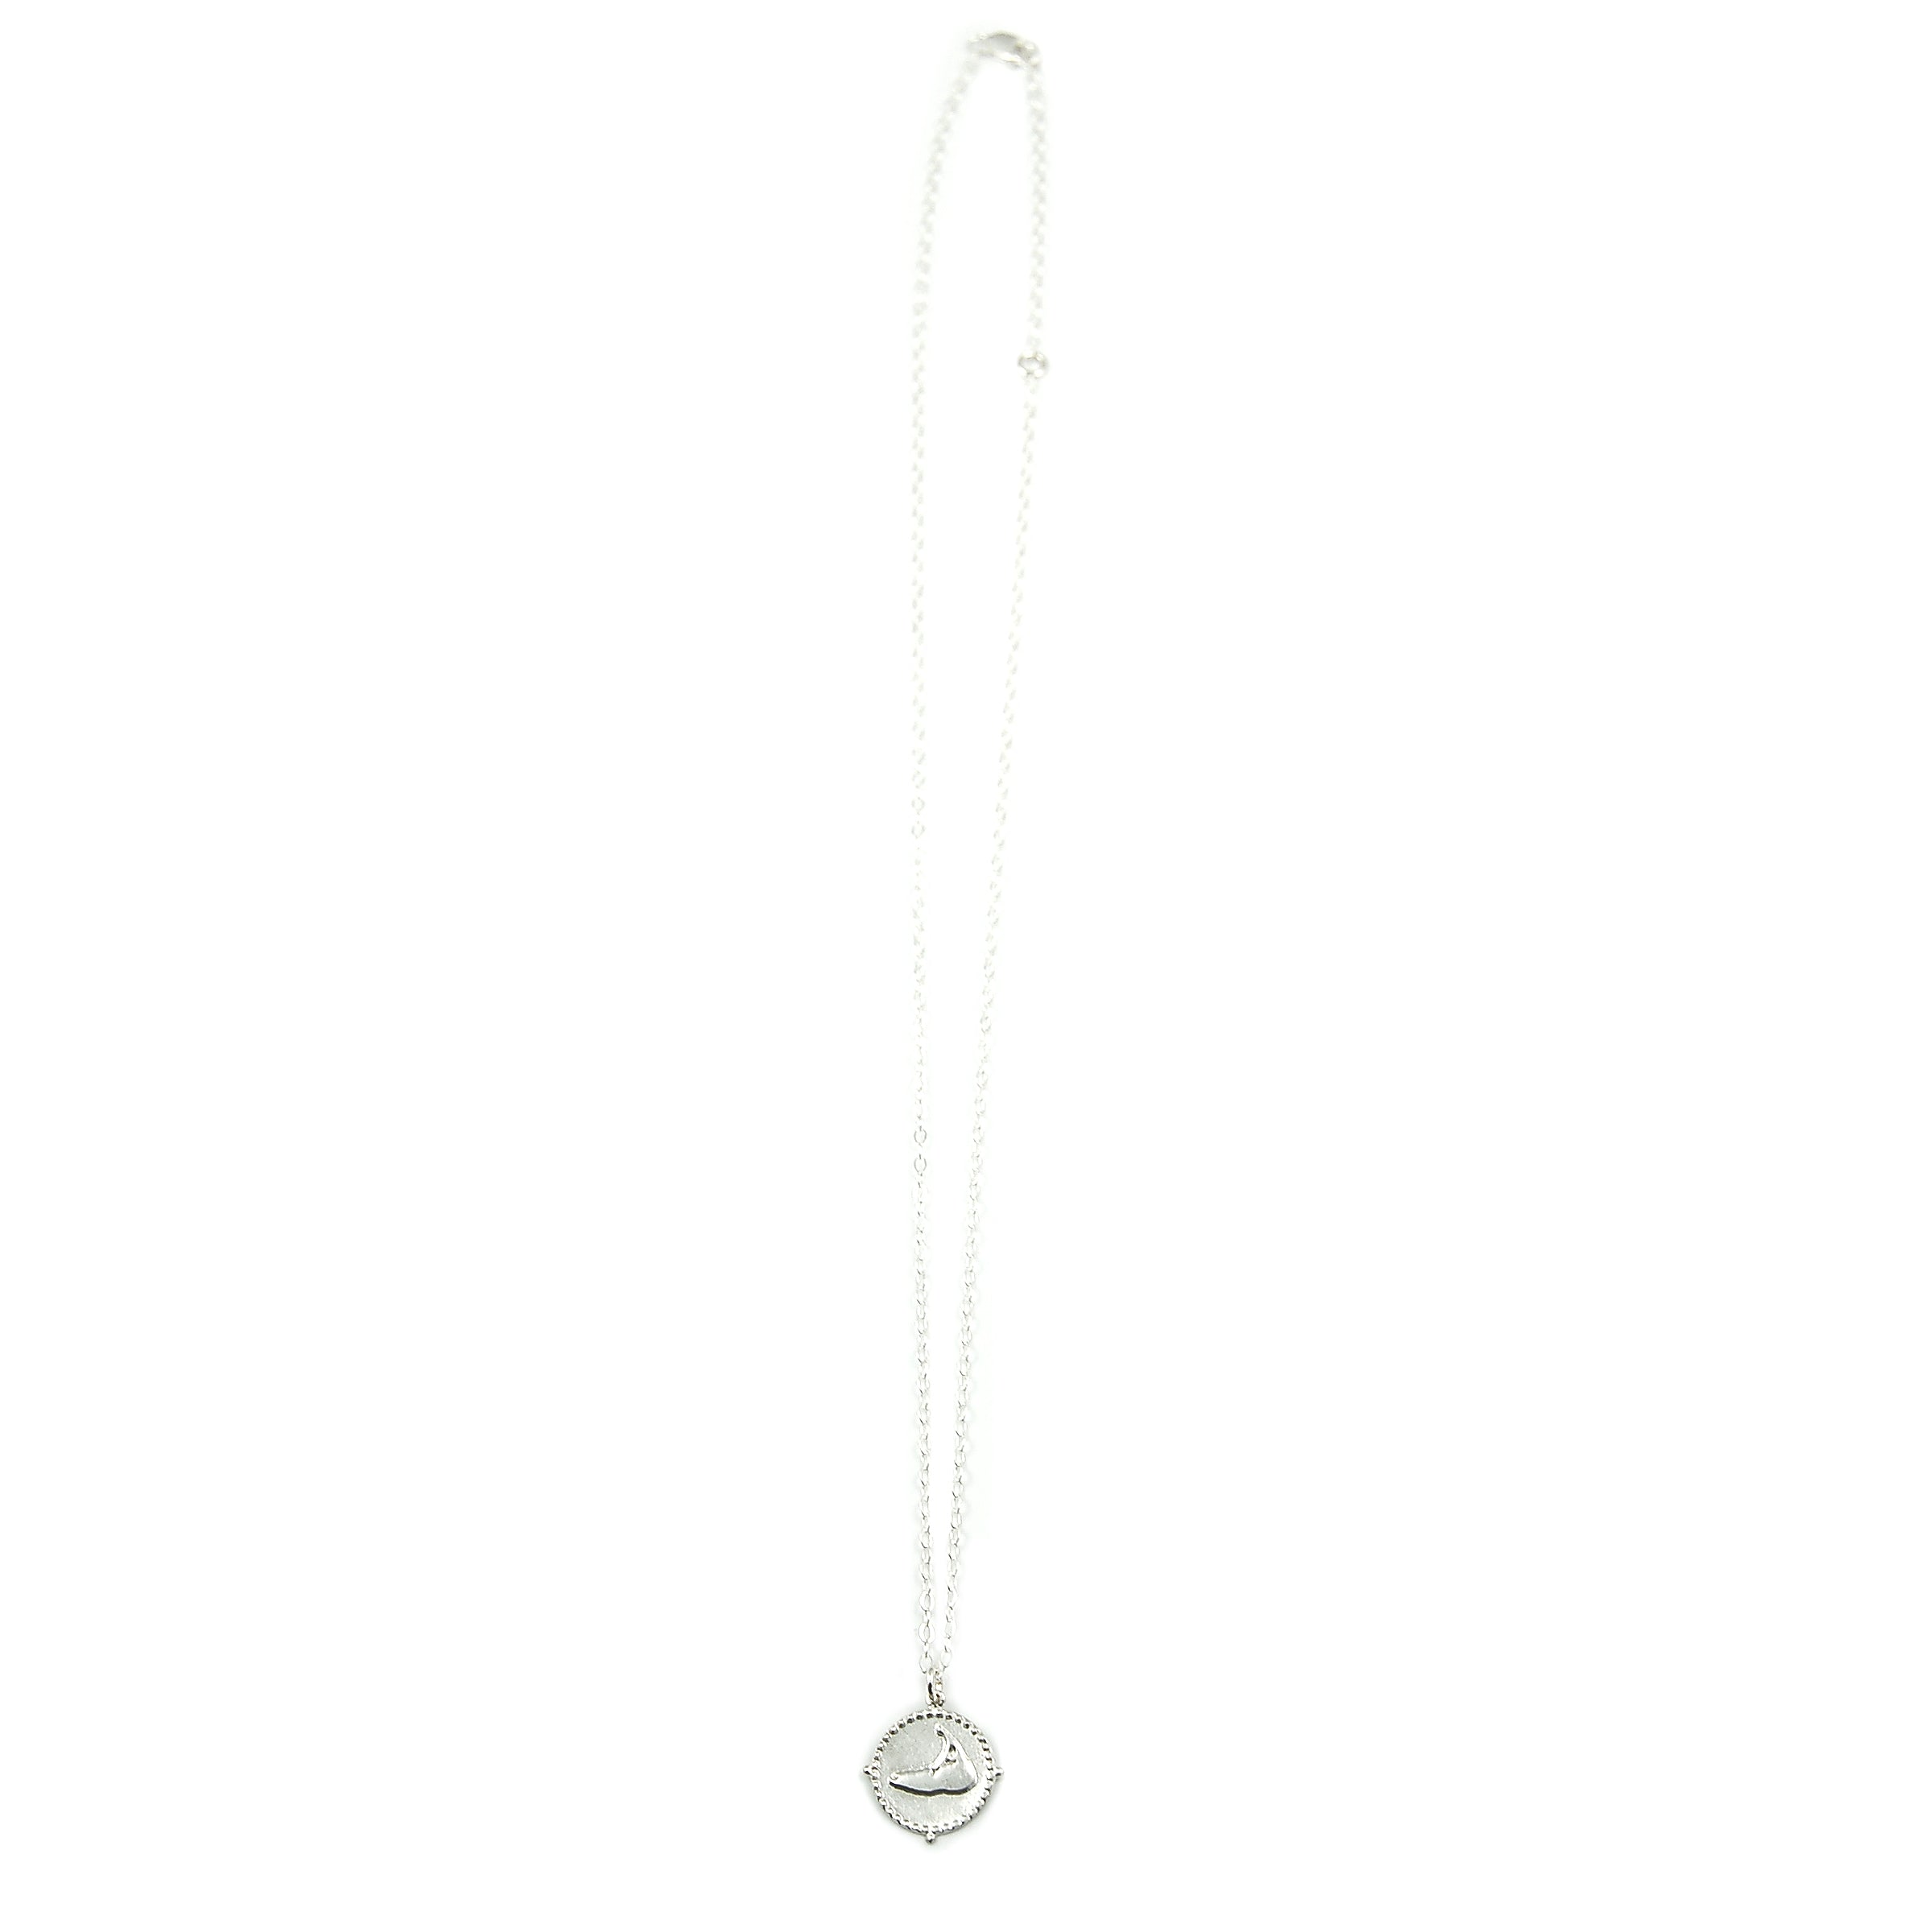 Nantucket Points Necklace ©